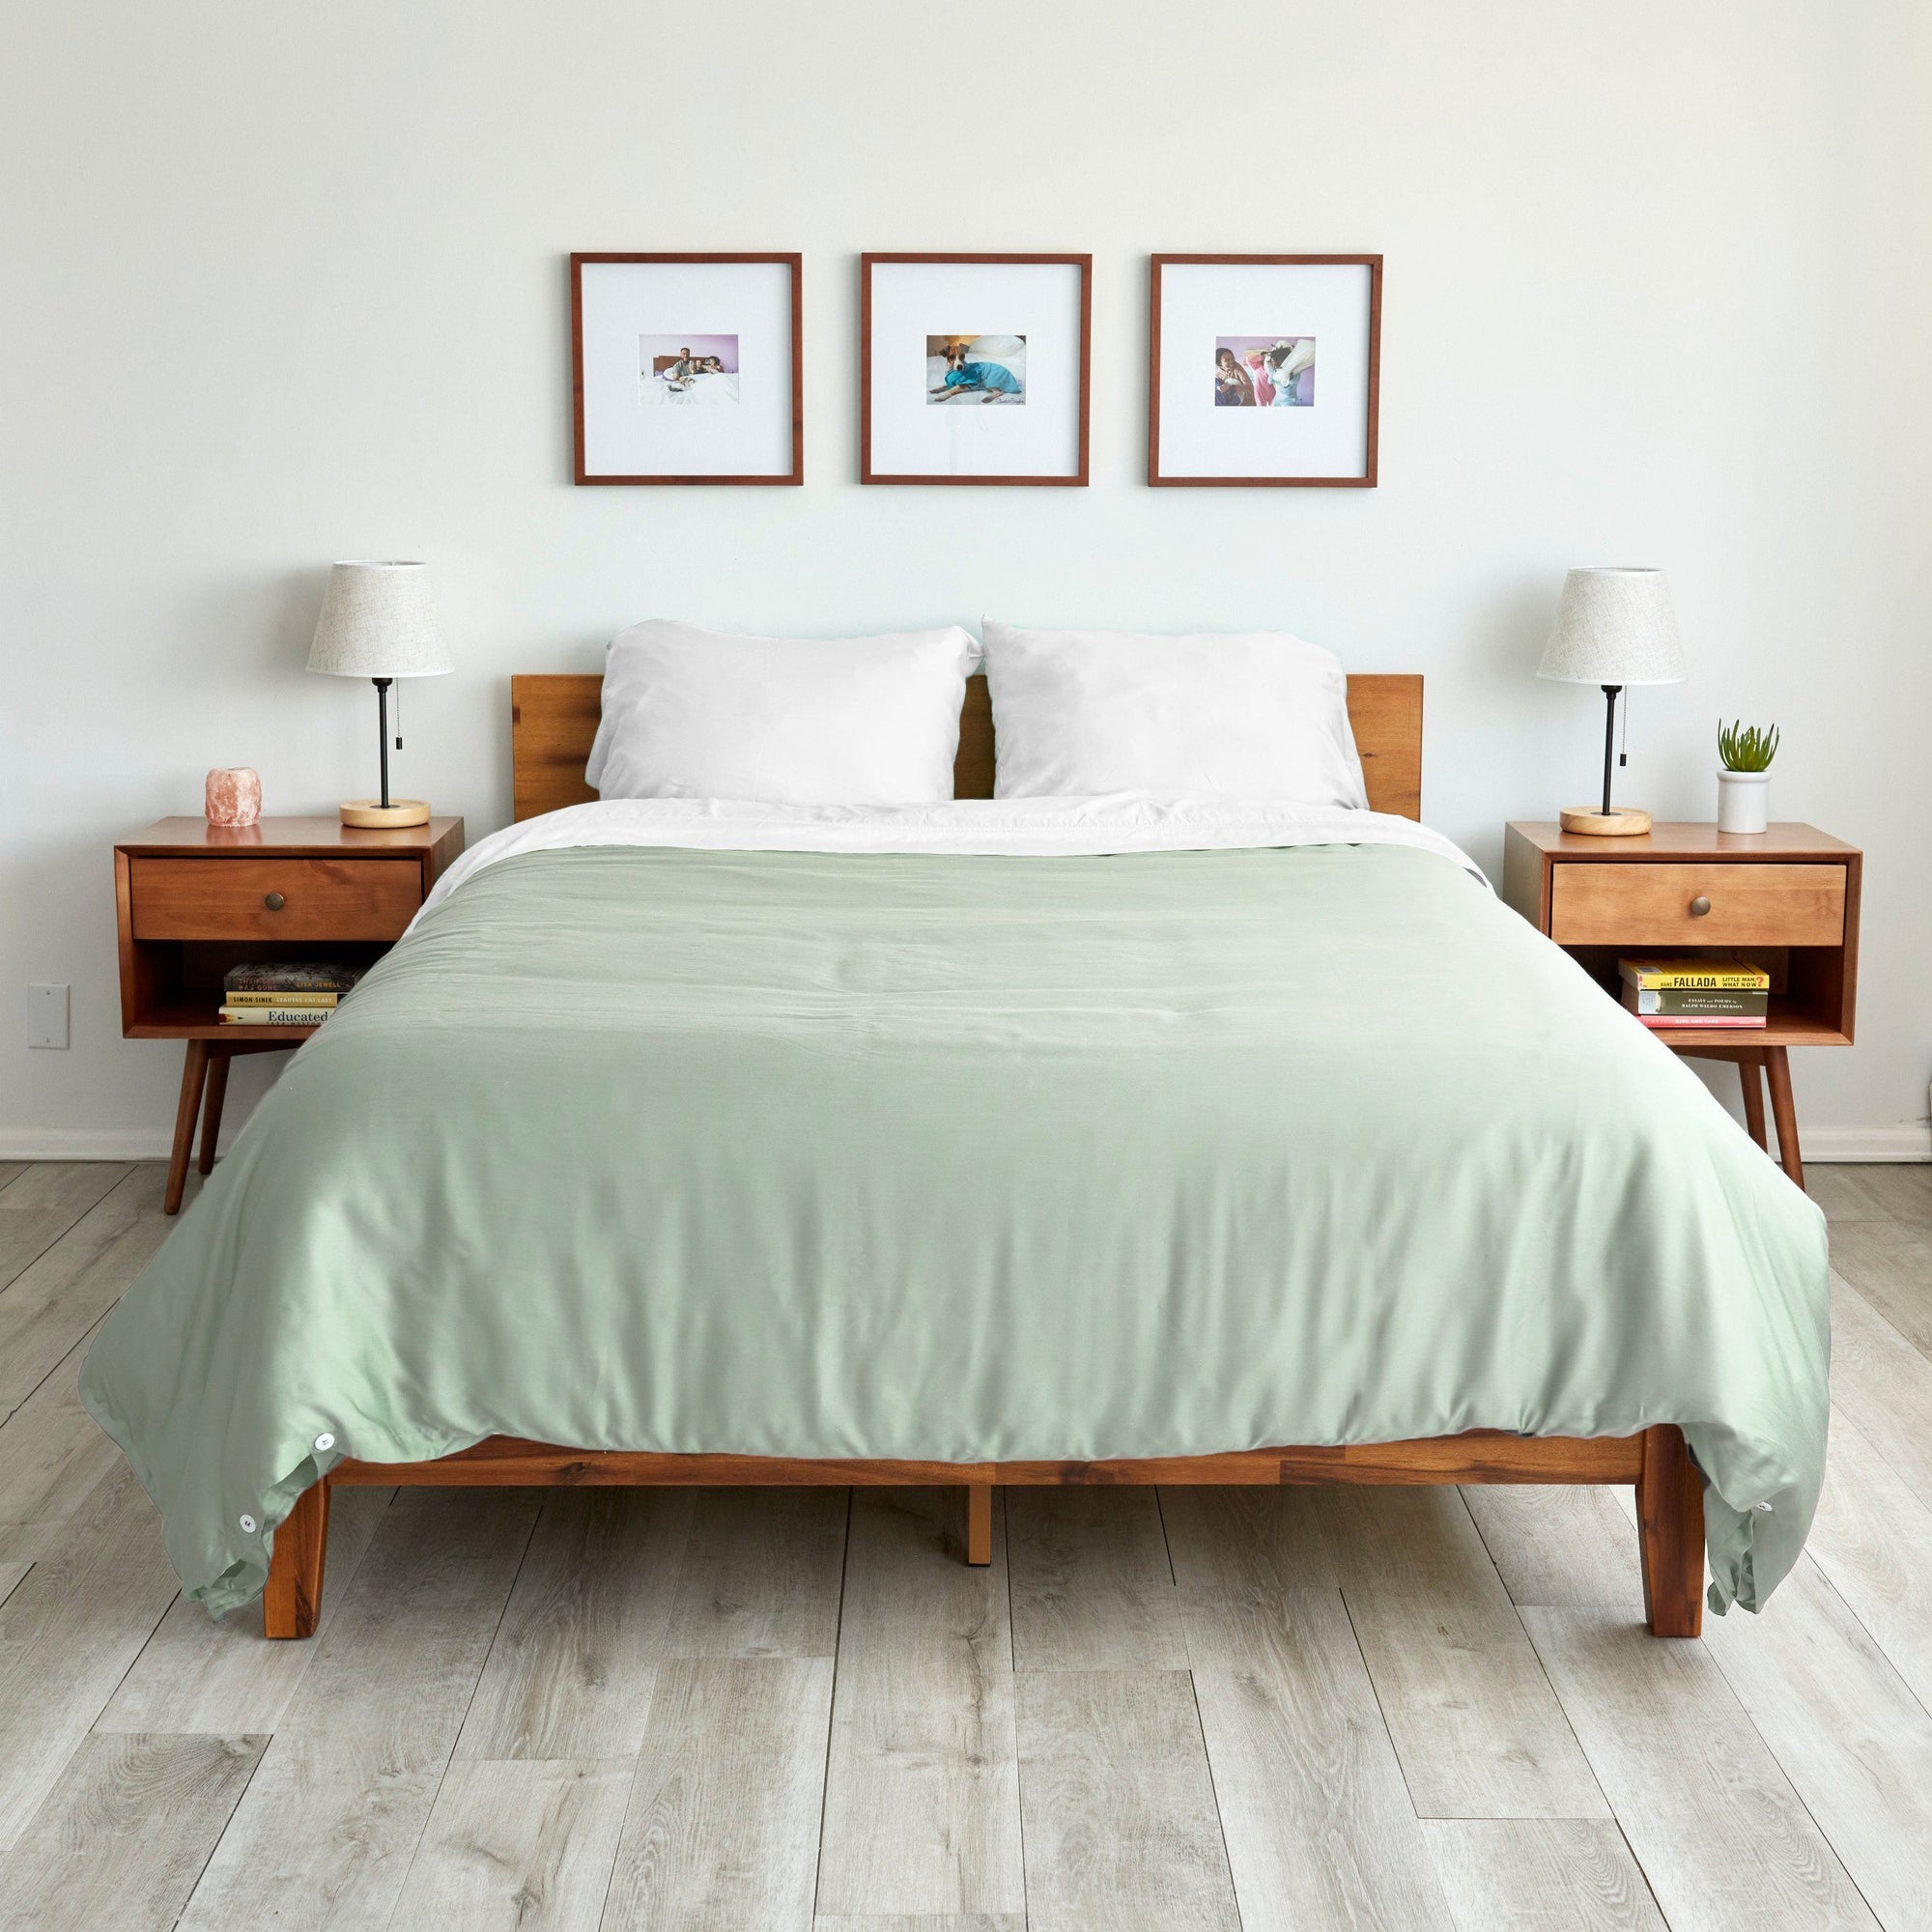 eucalyptus duvet cover in sage green on a bed we got at wayfair for a decent price||Sage